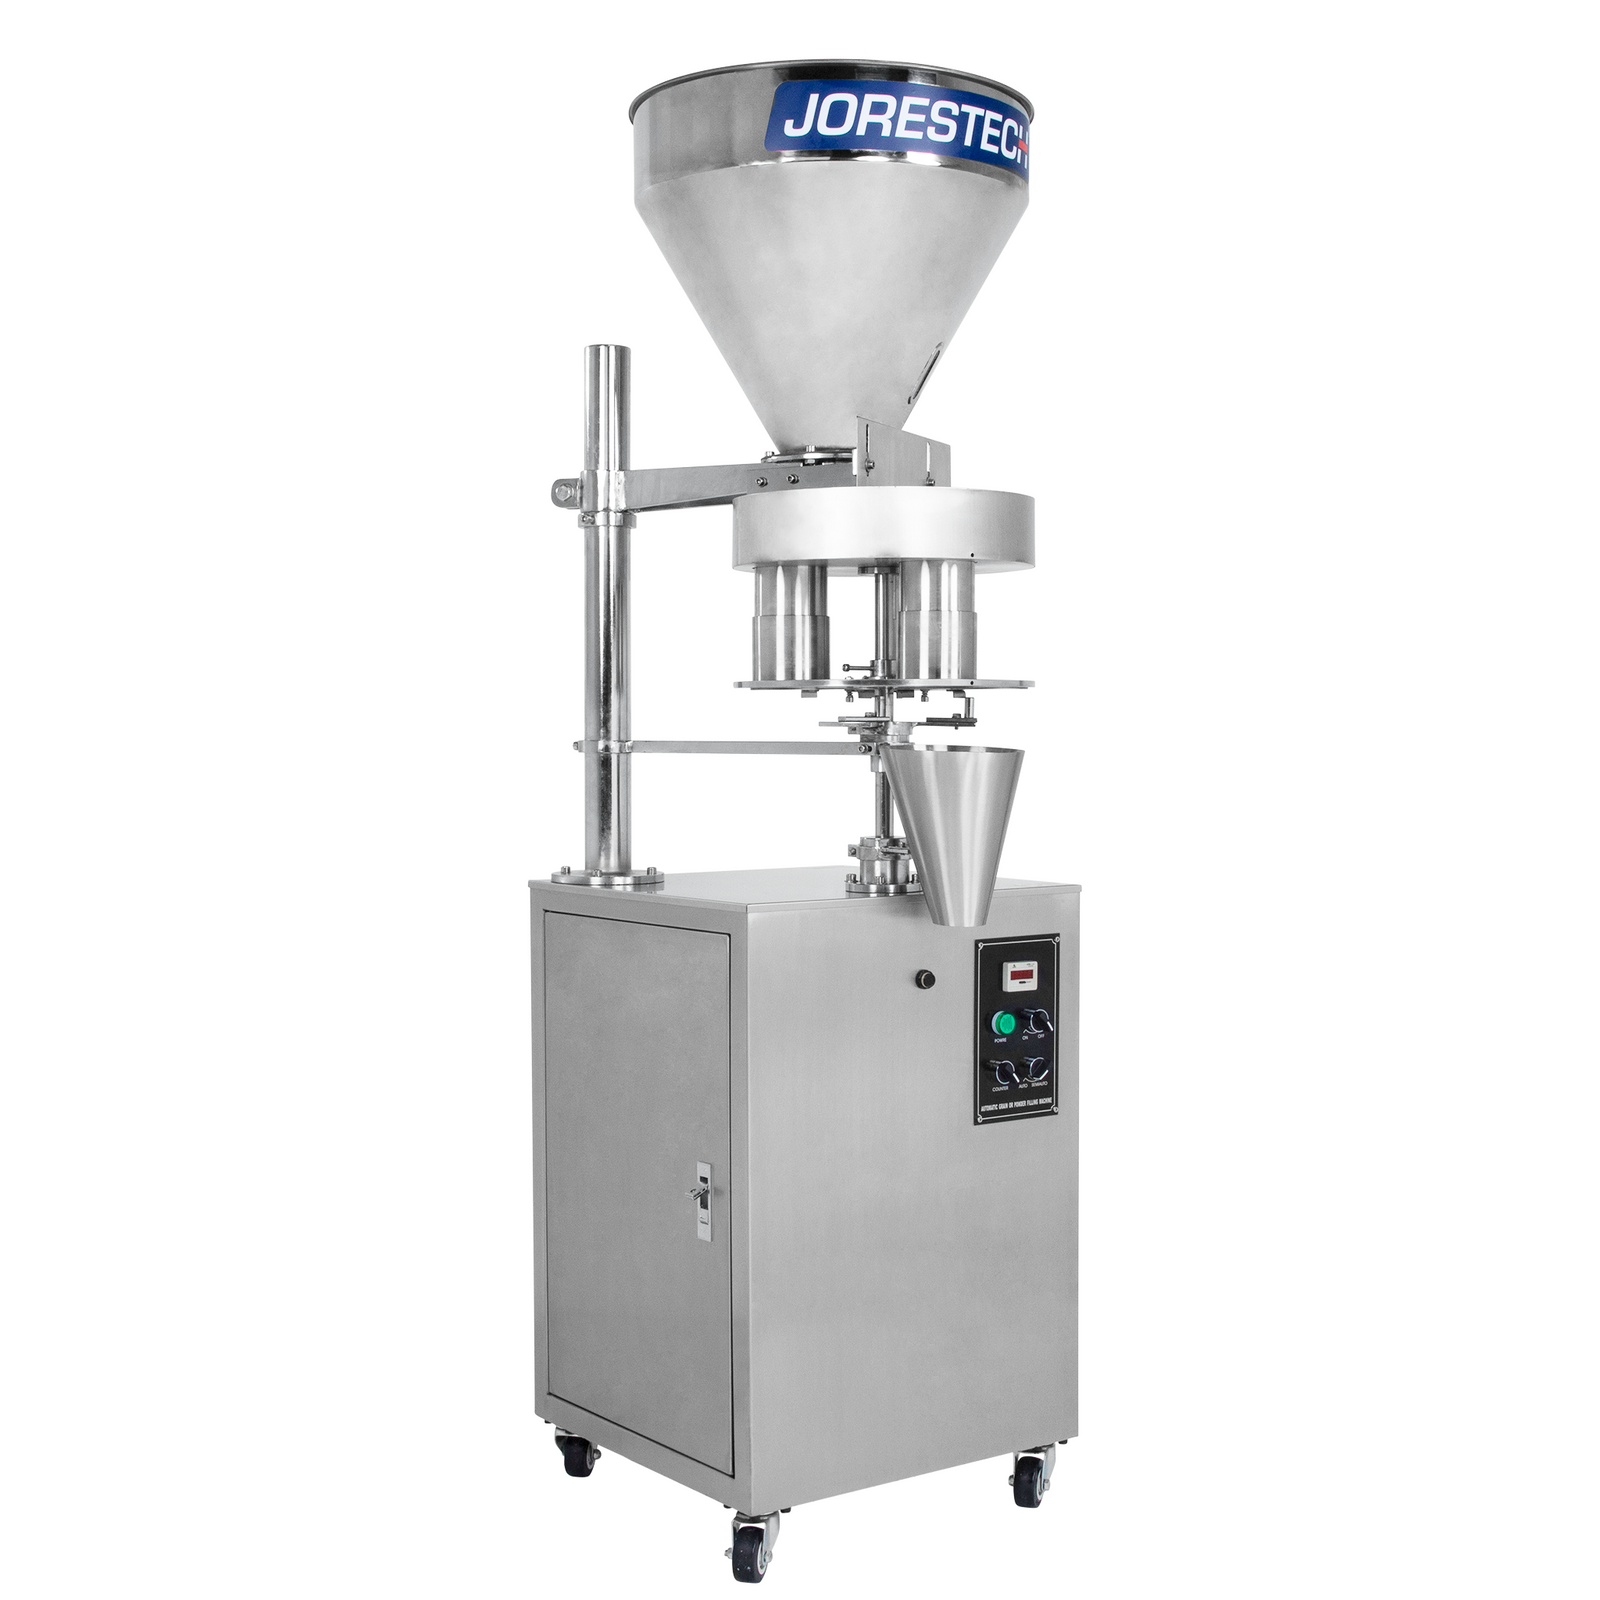 The stainless steel semi automatic volumetric filler for free-flowing granular products in a diagonal view